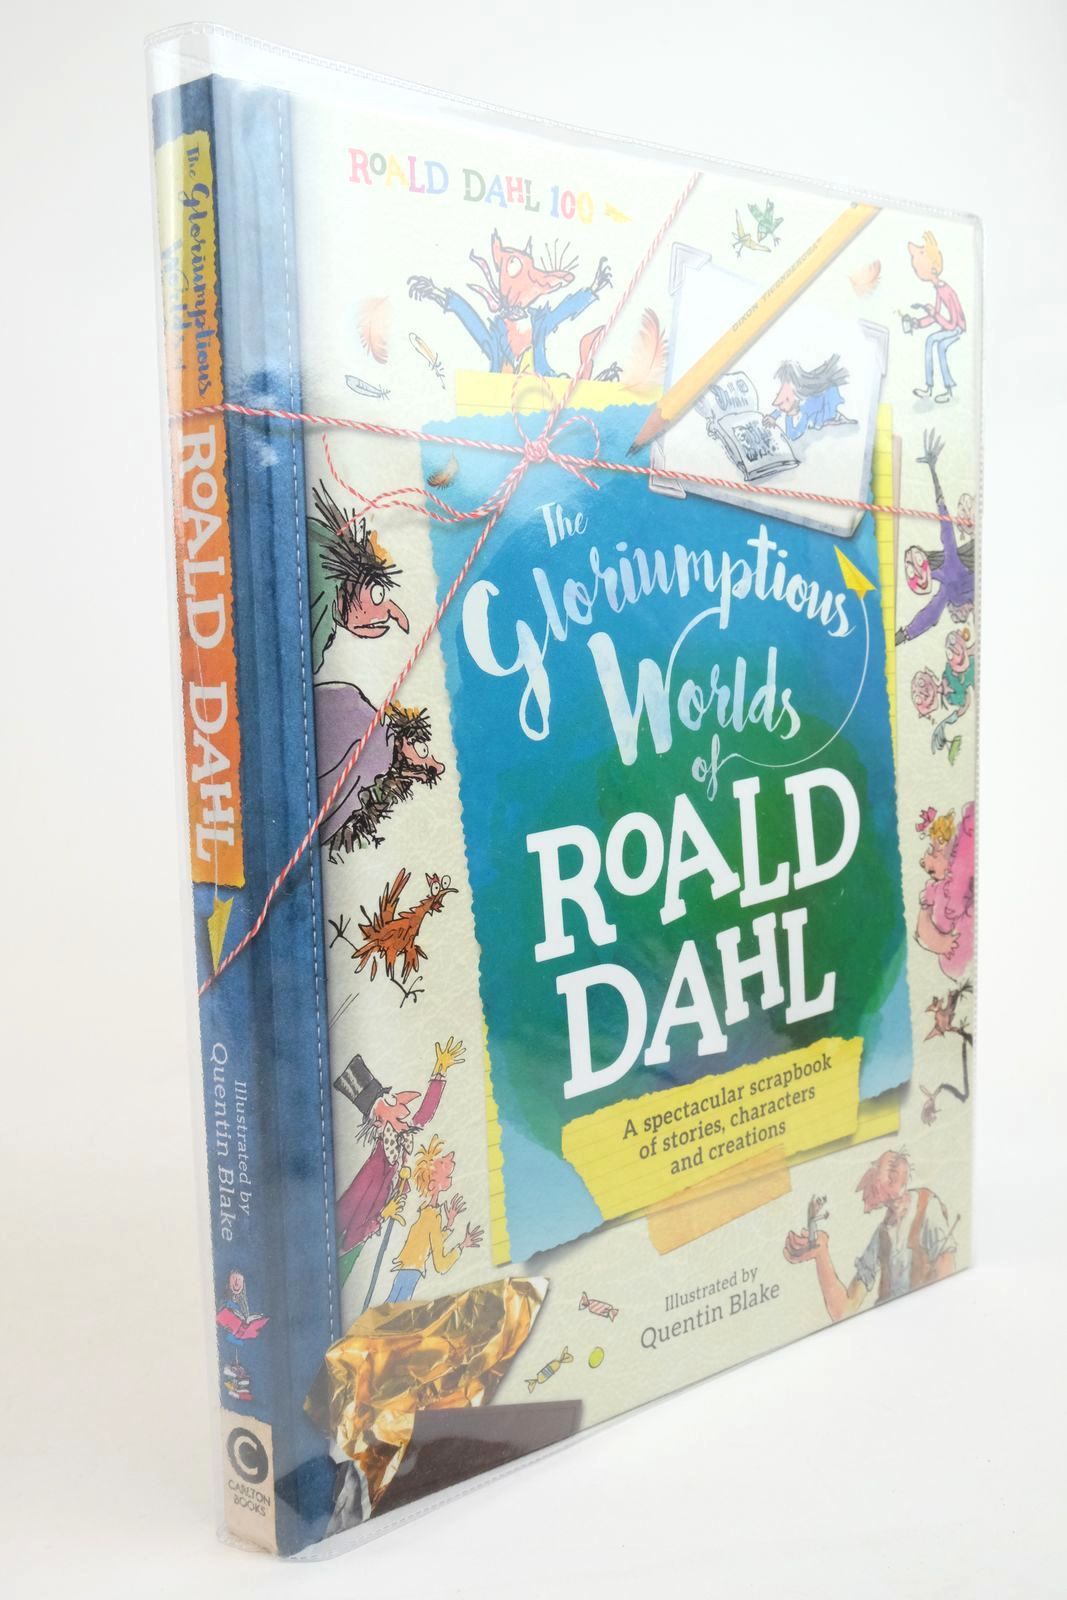 Photo of THE GLORIUMPTIOUS WORLDS OF ROALD DAHL written by Dahl, Roald Caldwell, Stella illustrated by Blake, Quentin published by Carlton Books Limited (STOCK CODE: 1322361)  for sale by Stella & Rose's Books